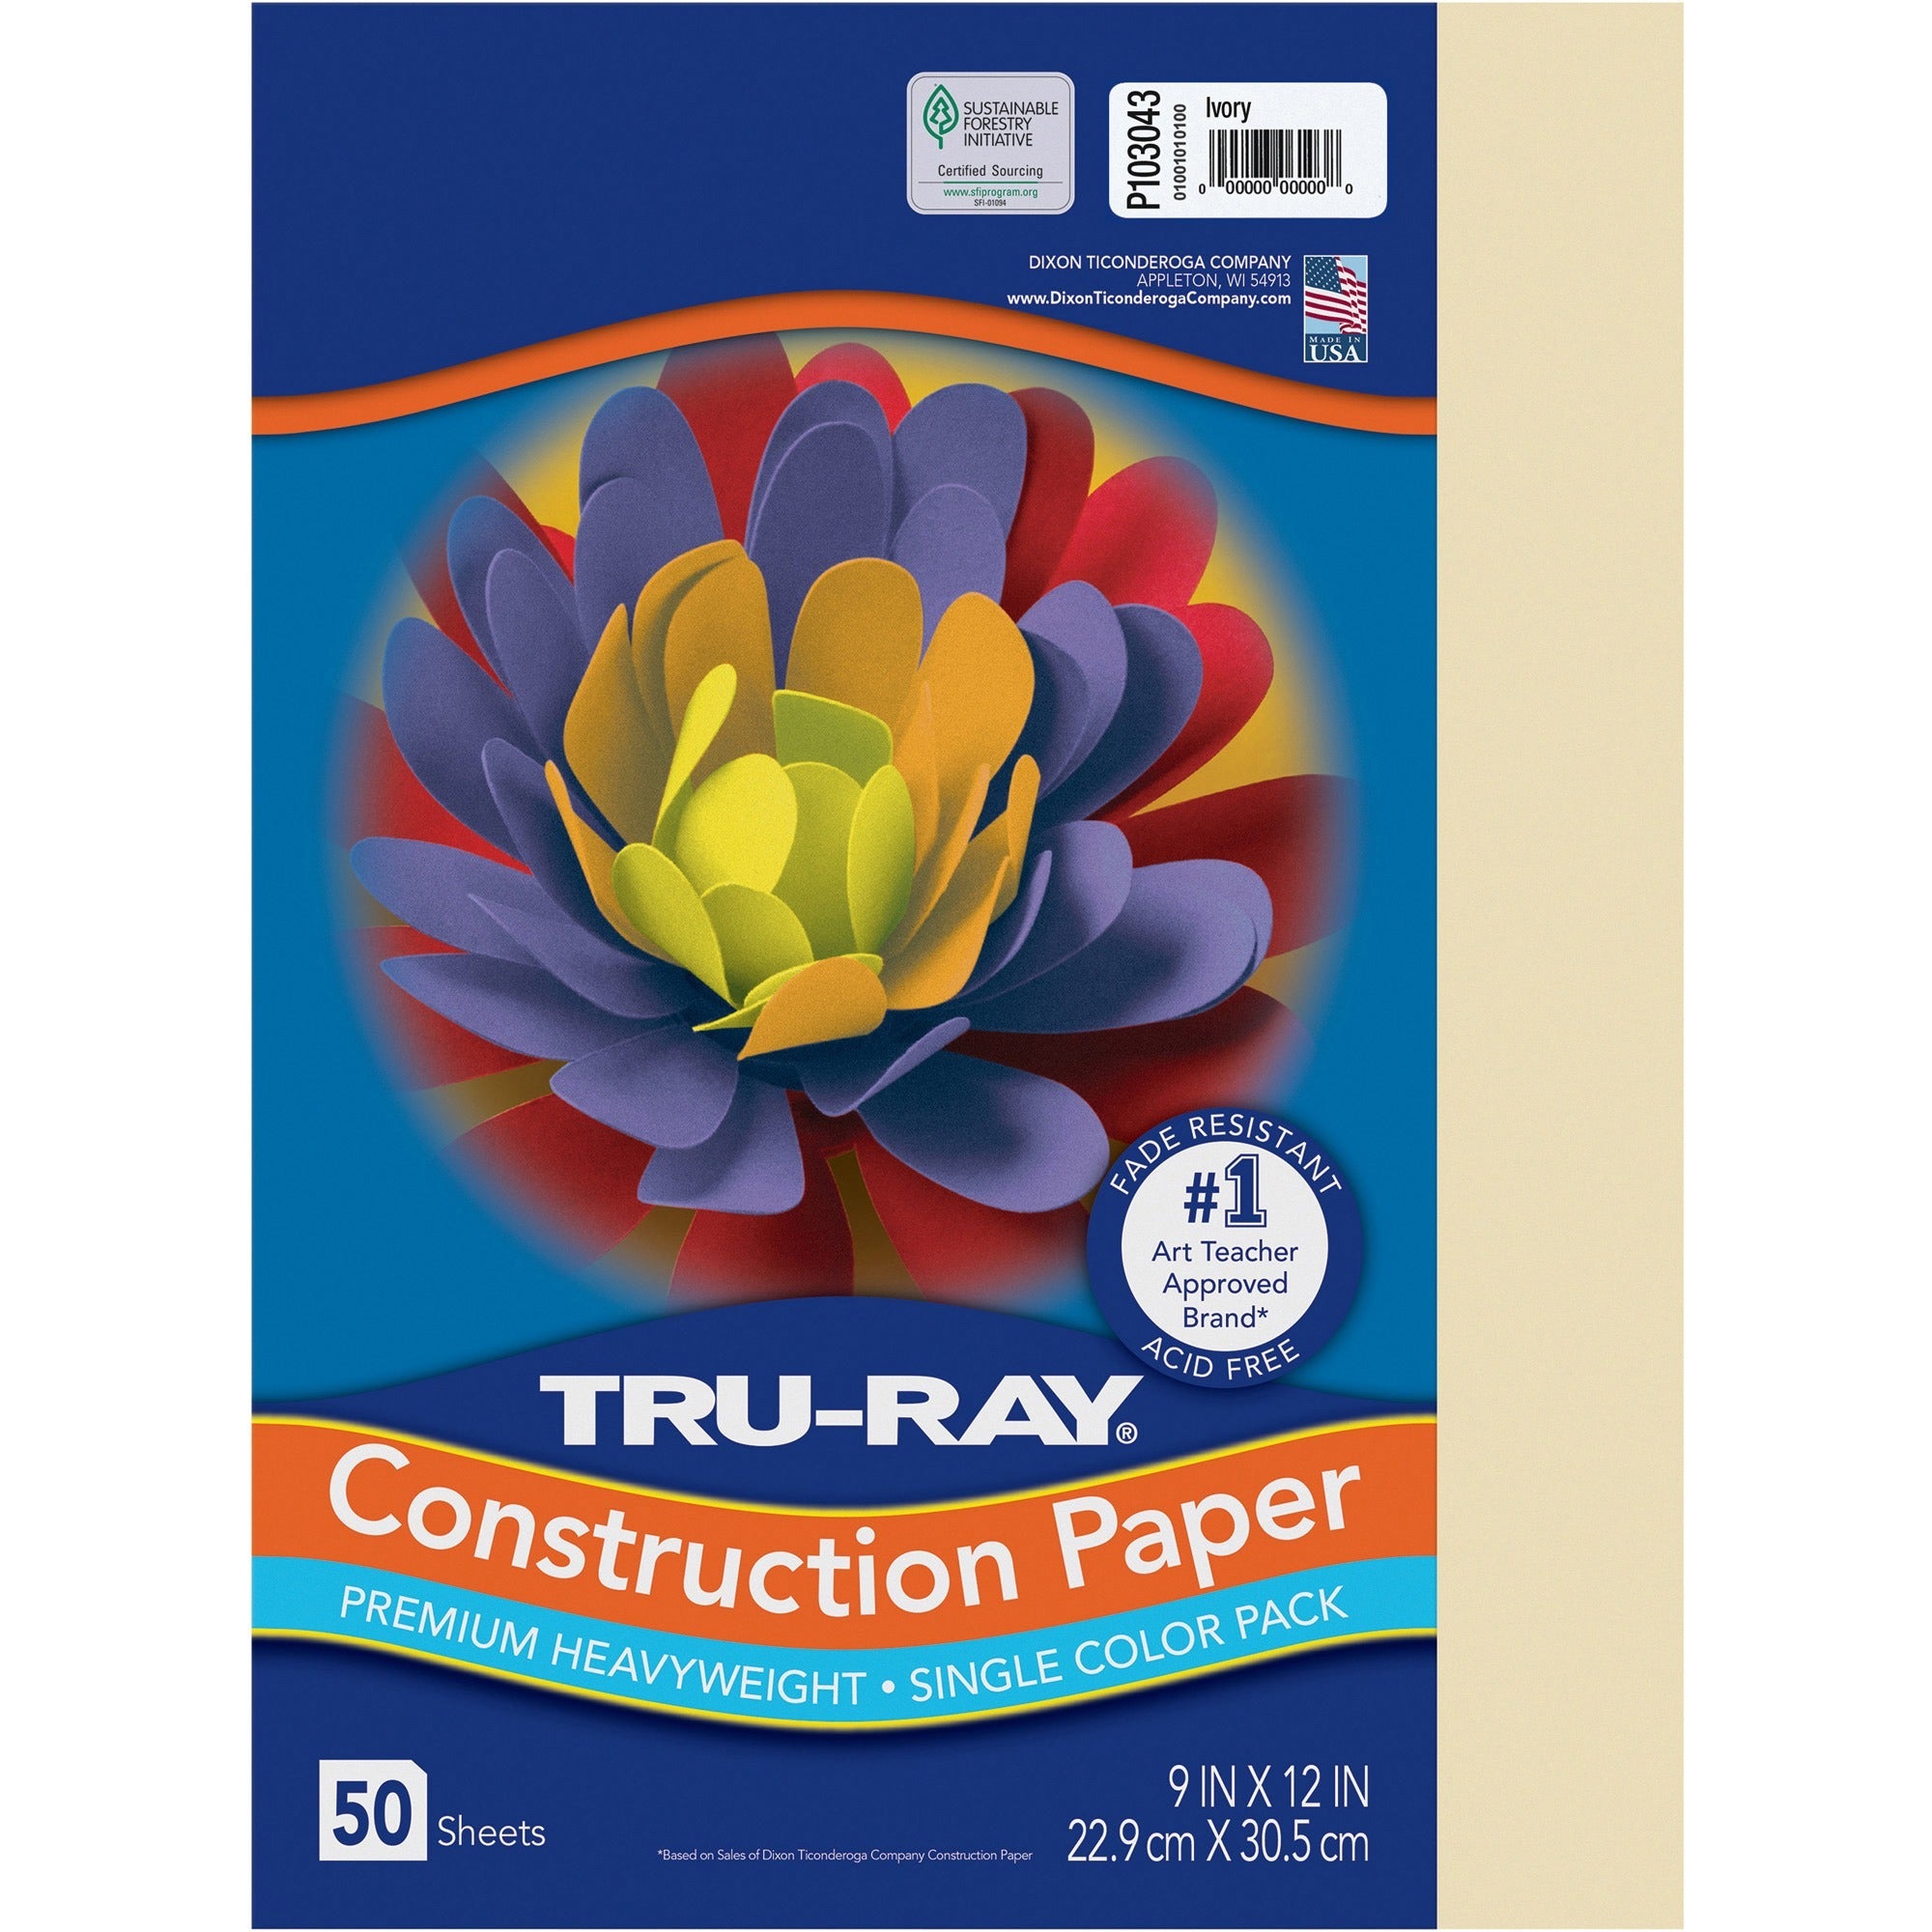 tru-ray-construction-paper-art-project-craft-project-9width-x-12length-76-lb-basis-weight-50-pack-ivory-fiber-sulphite_pacp103043 - 1